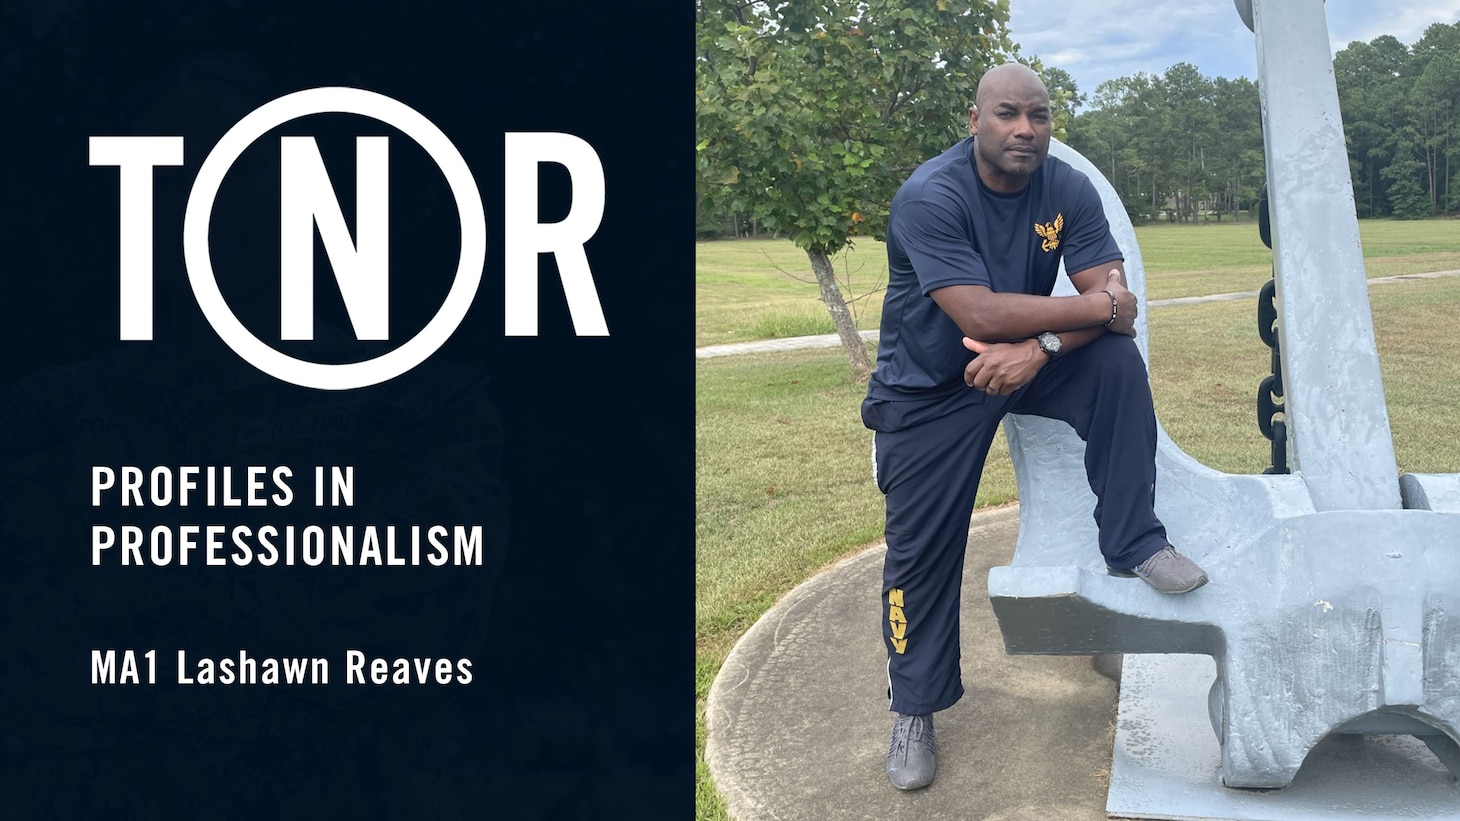 Master-at-Arms 1st Class Lashawn O. Reaves joined the Navy Reserve on a football bet, but has no regrets. “Losing that bet changed the trajectory of my life in one of the best ways imaginable,” he stated.